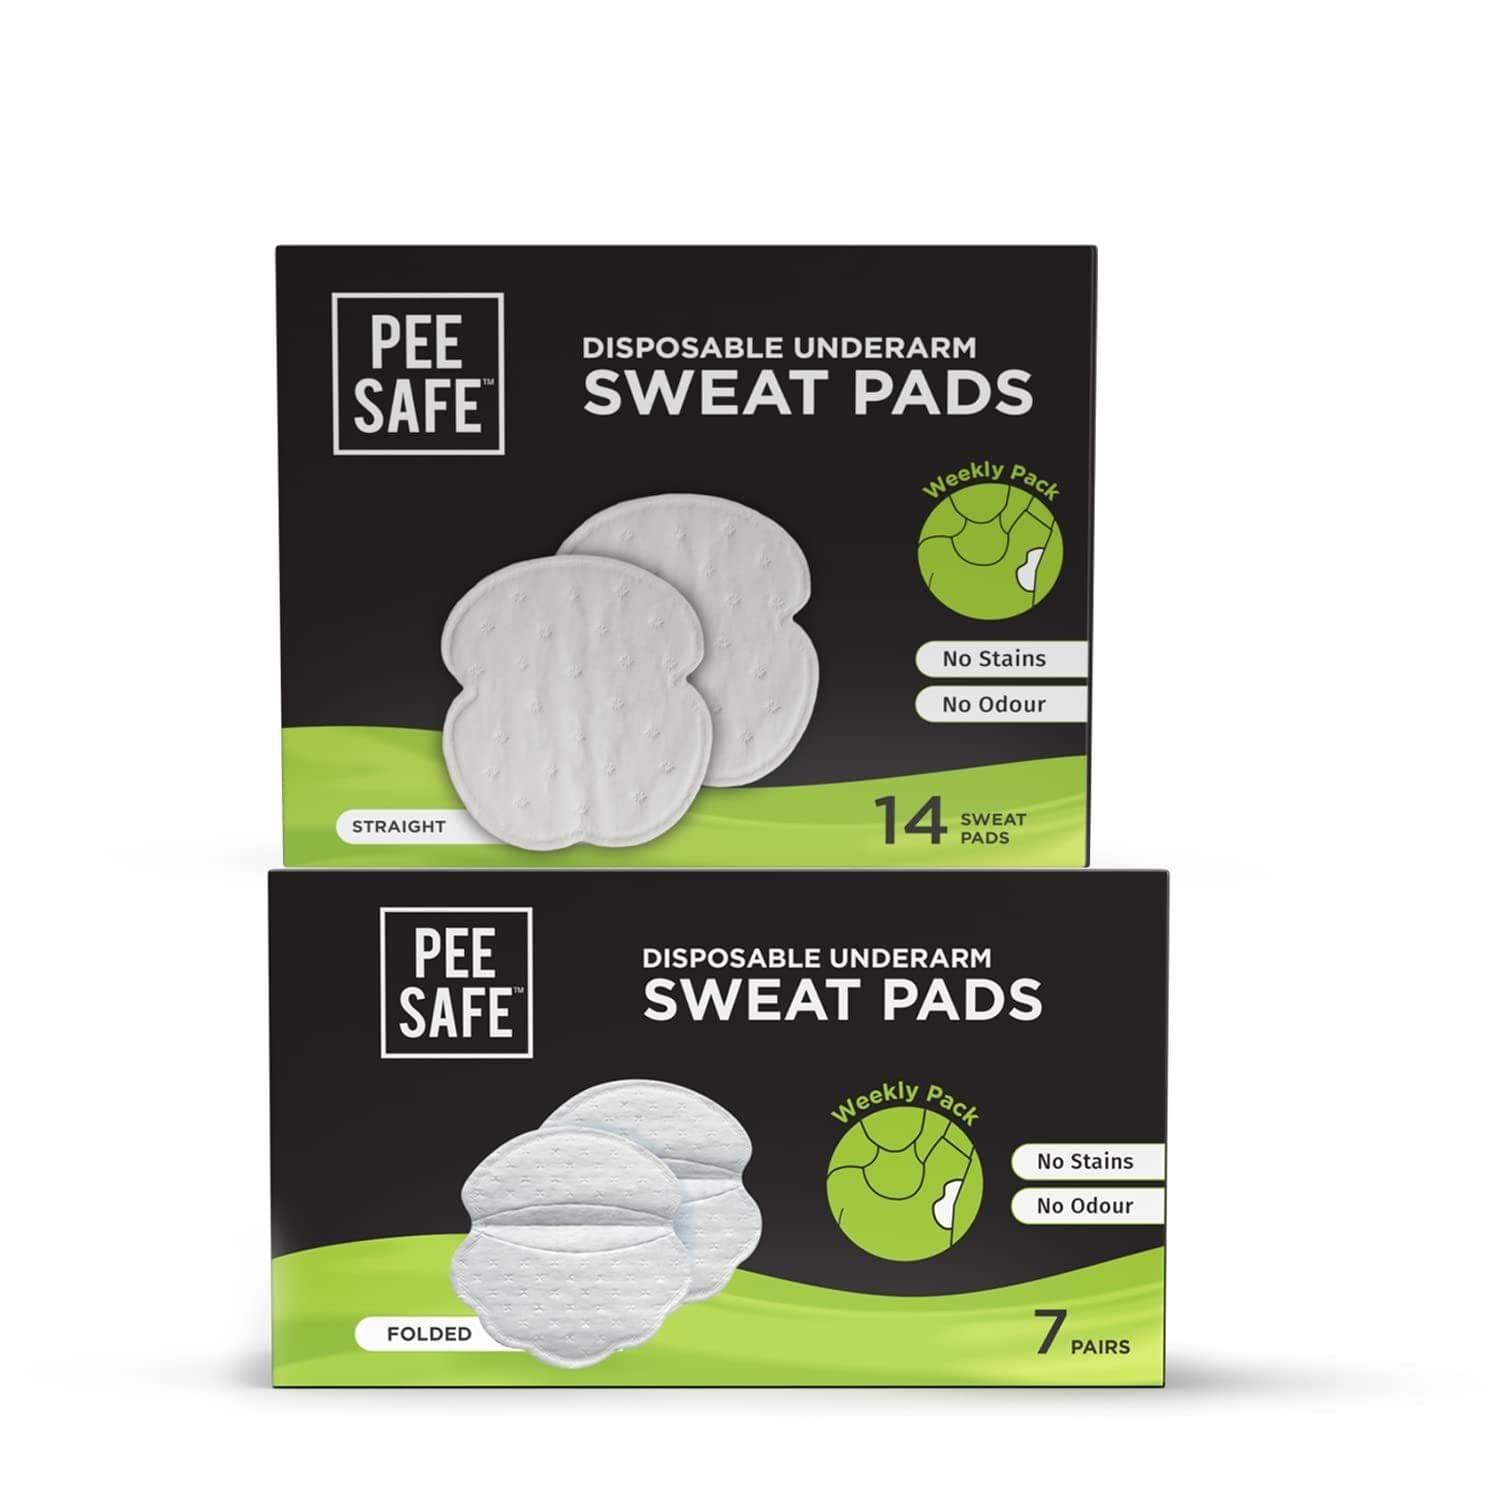 Pee Safe Disposable Underarm Sweat Pads Straight & Folded Combo | Prevents Stains | Absorbs Sweat & Unpleasant Odour | Breathable And Deodorizing | For Men & Women | Pack Of 14 Pairs ( 28 Units)